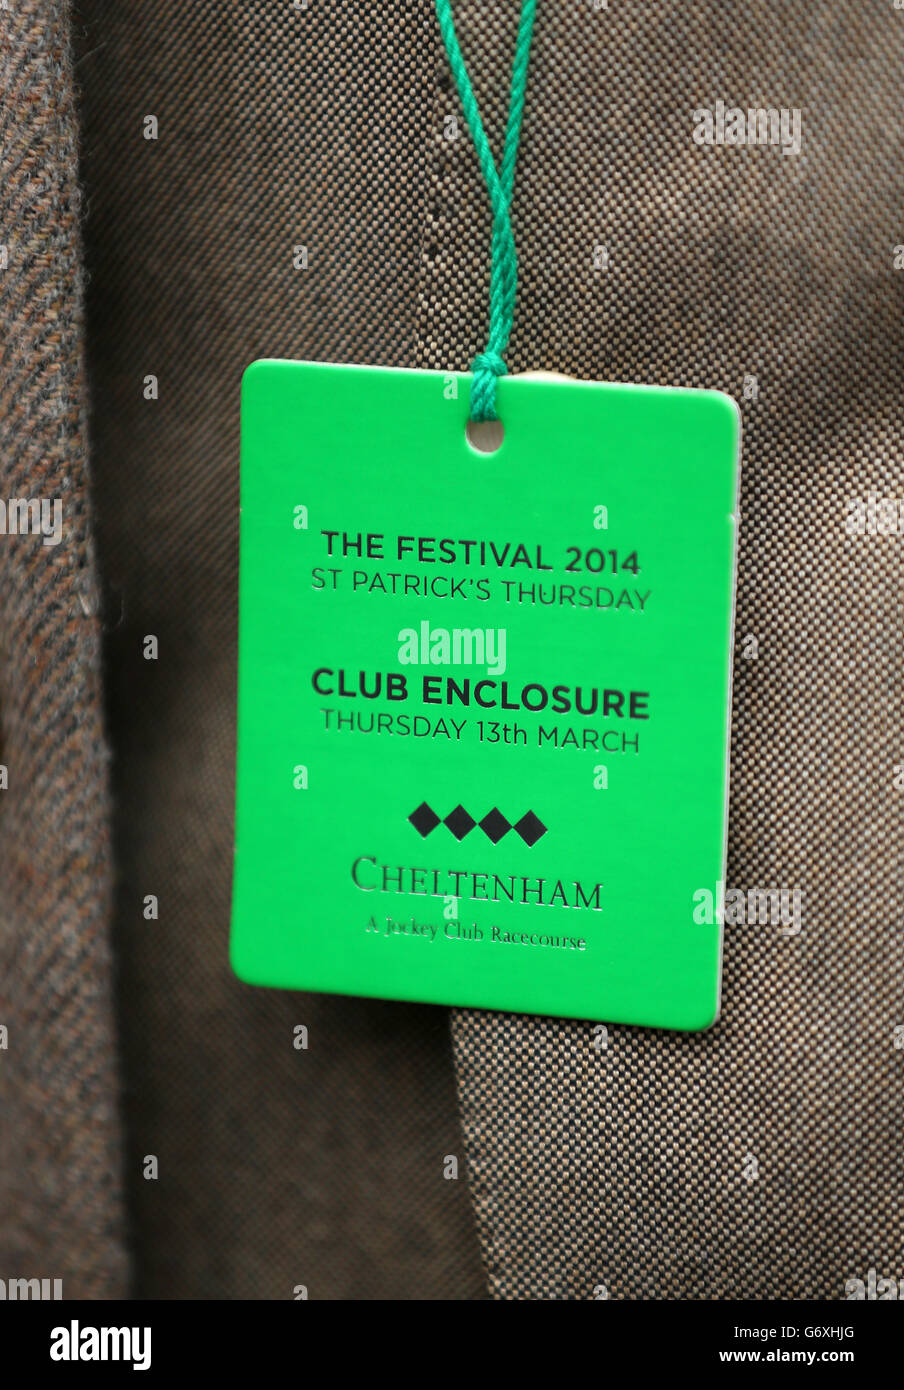 Detail of a racegoers pass for the Club Enclosure on St Patricks Day at Cheltenham Racecourse Stock Photo